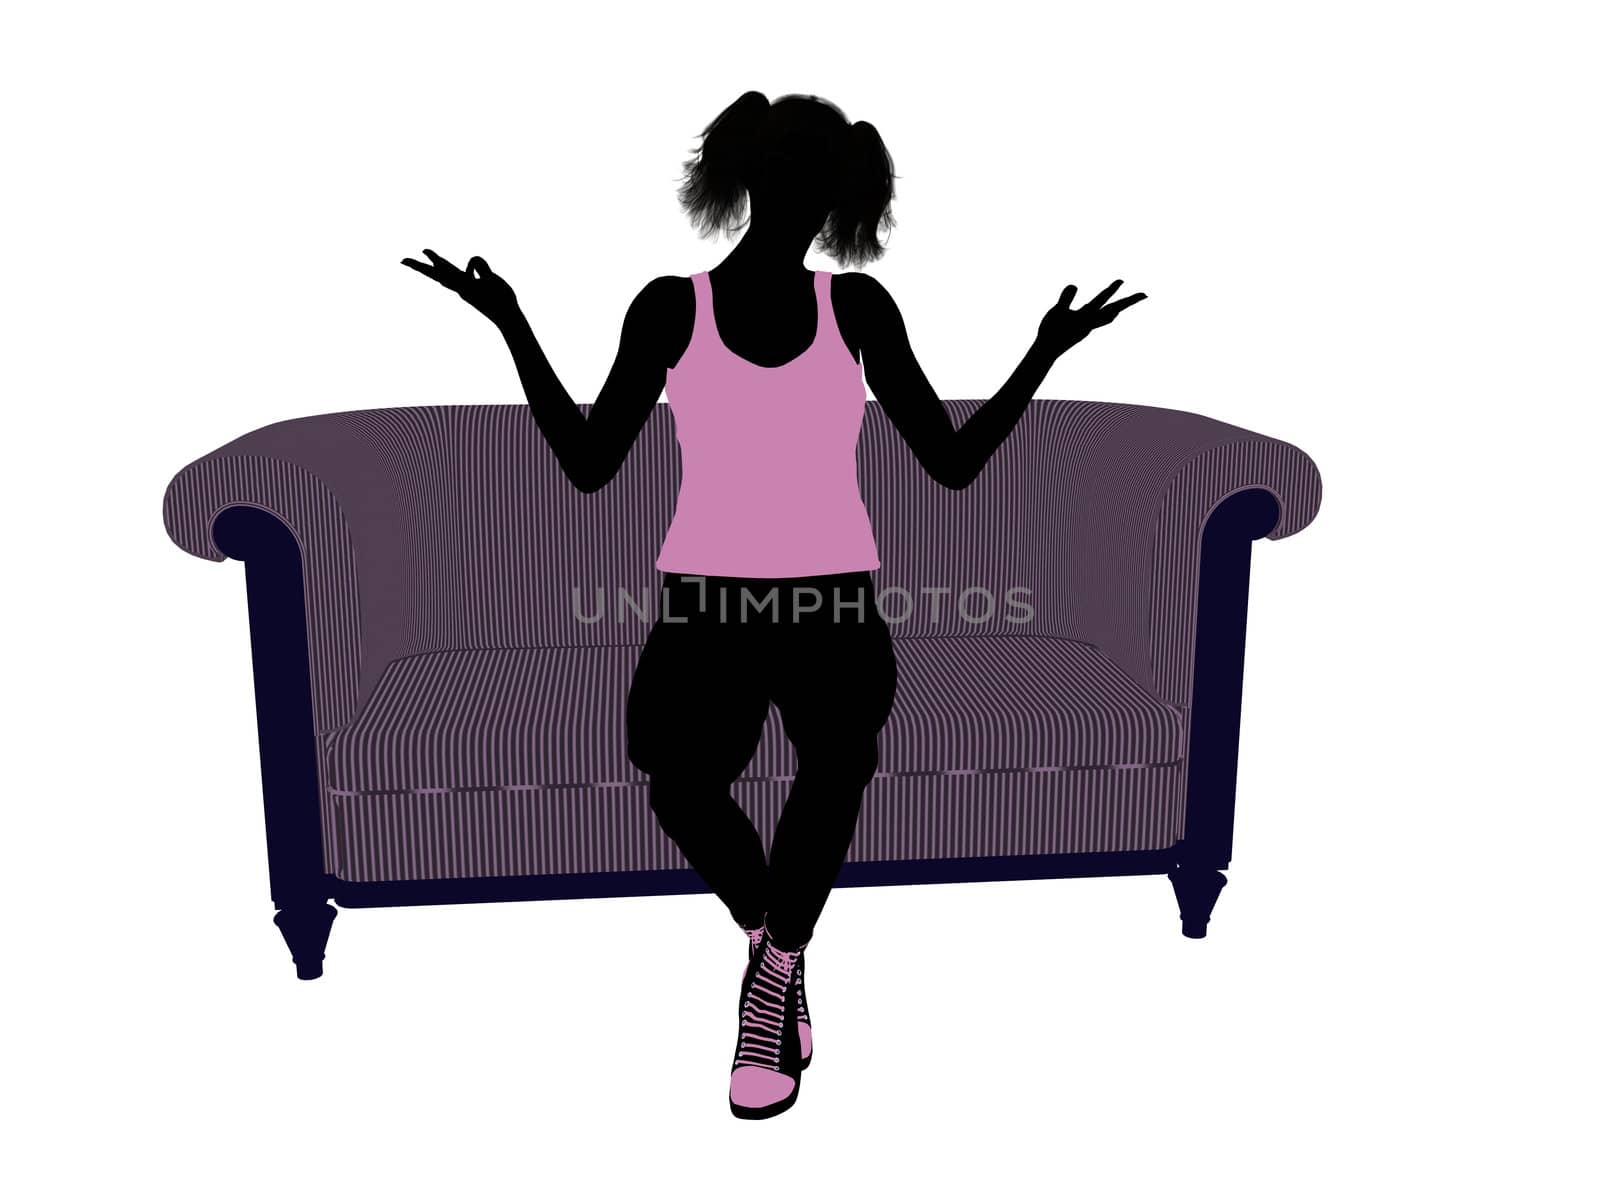 Female athlete sitting on a sofa silhouette on a white background